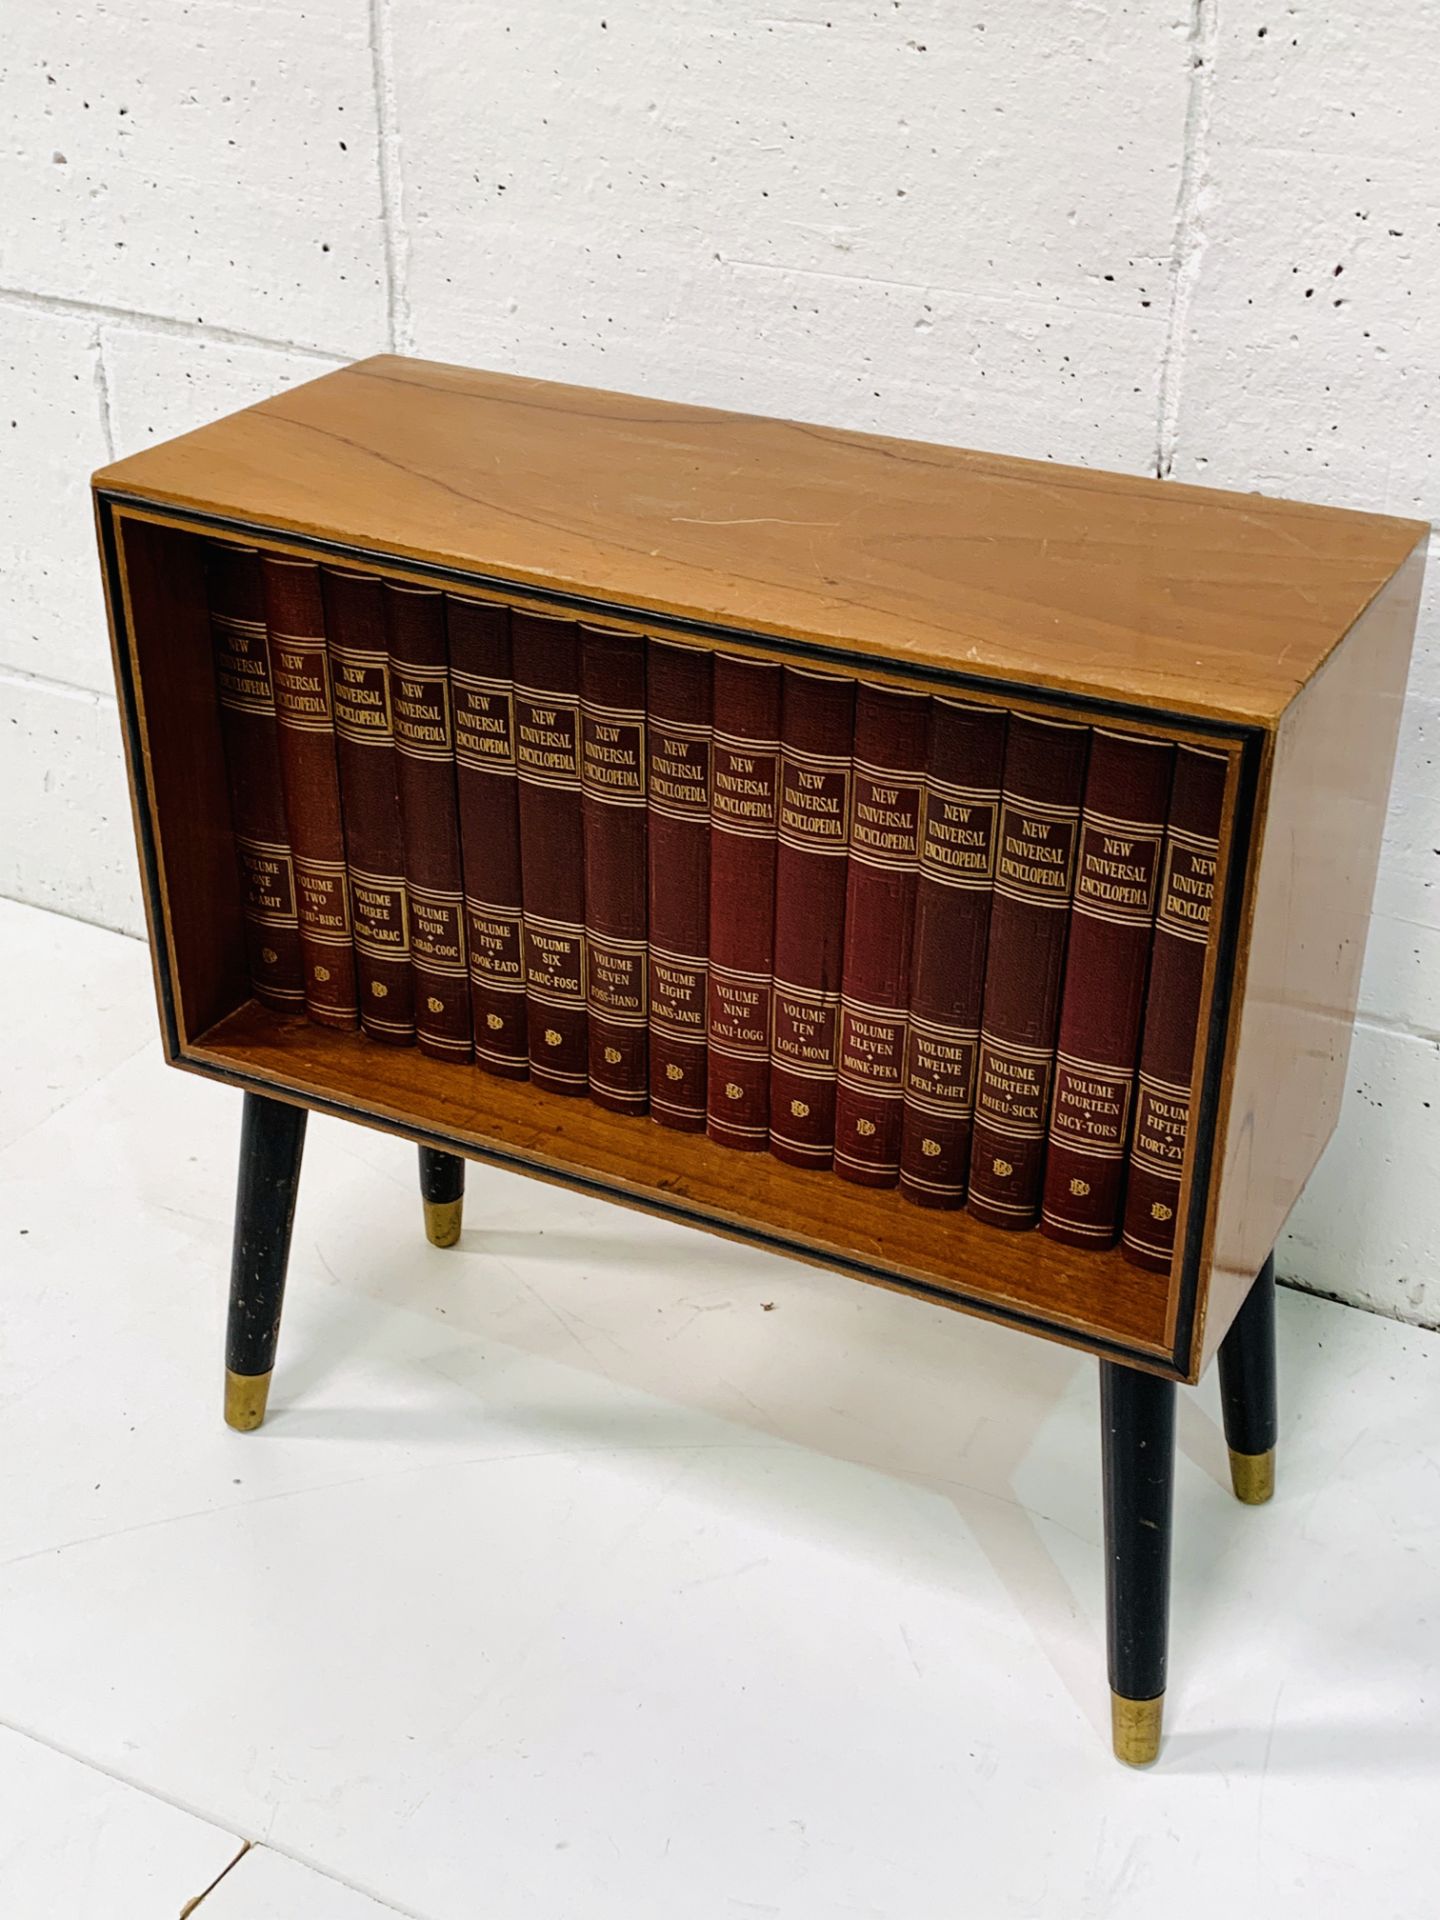 Teak small 1950's bookcase on legs with a complete set of the New Universal Encyclopedia. - Image 3 of 3